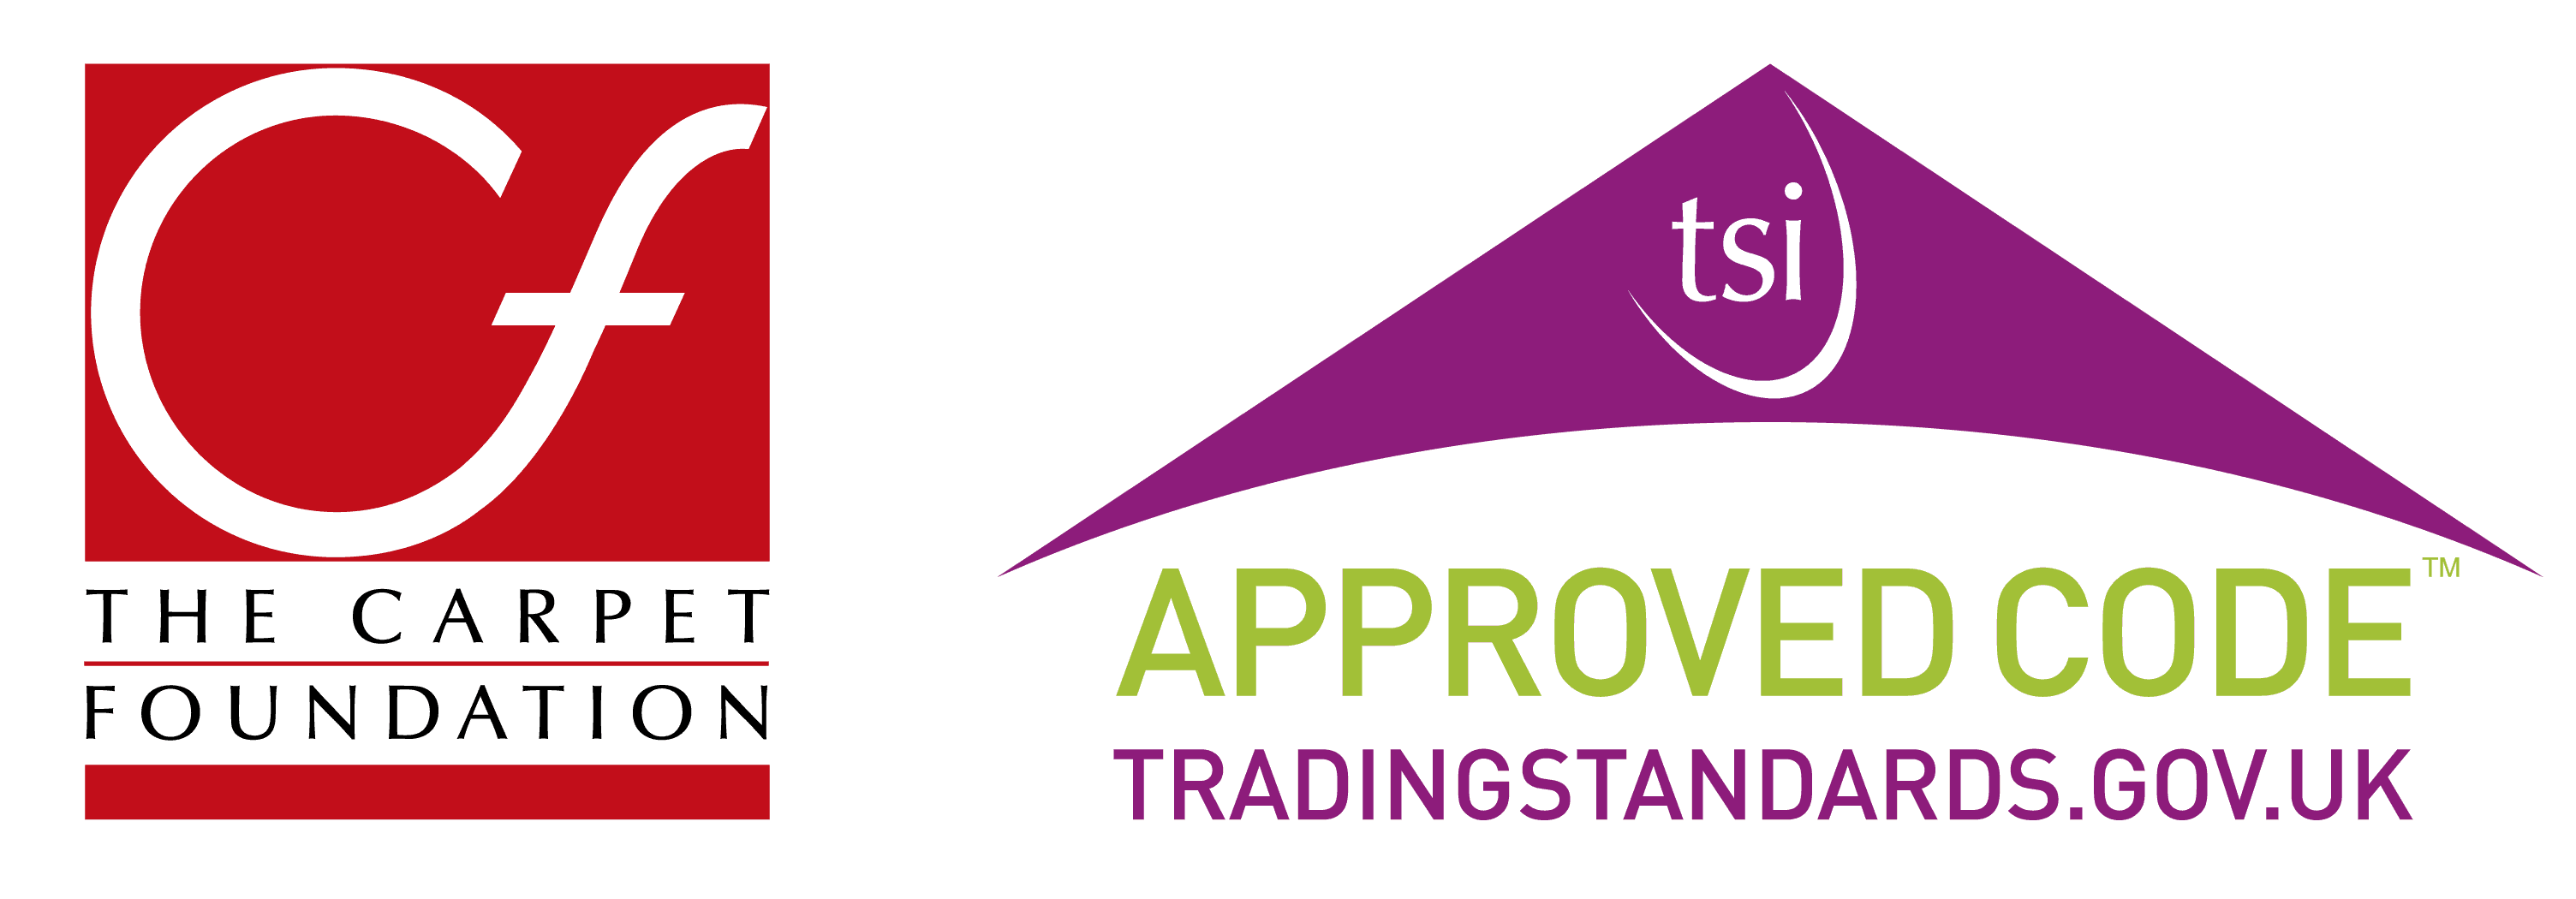 The Carpet Foundation & Trading Standards Approved